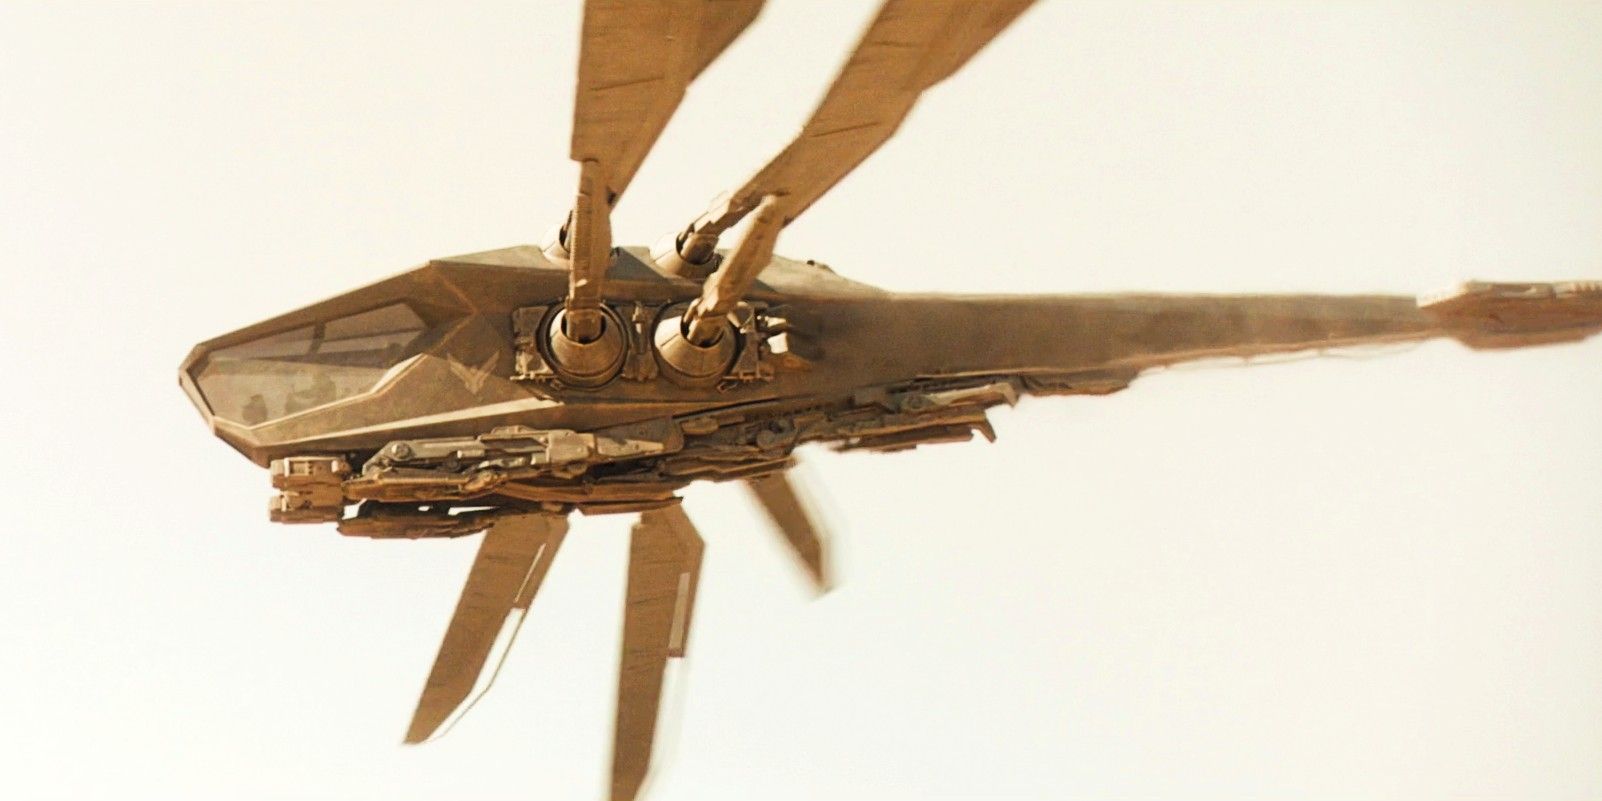 How Dune Made Dragonfly Ornithopters Look Real